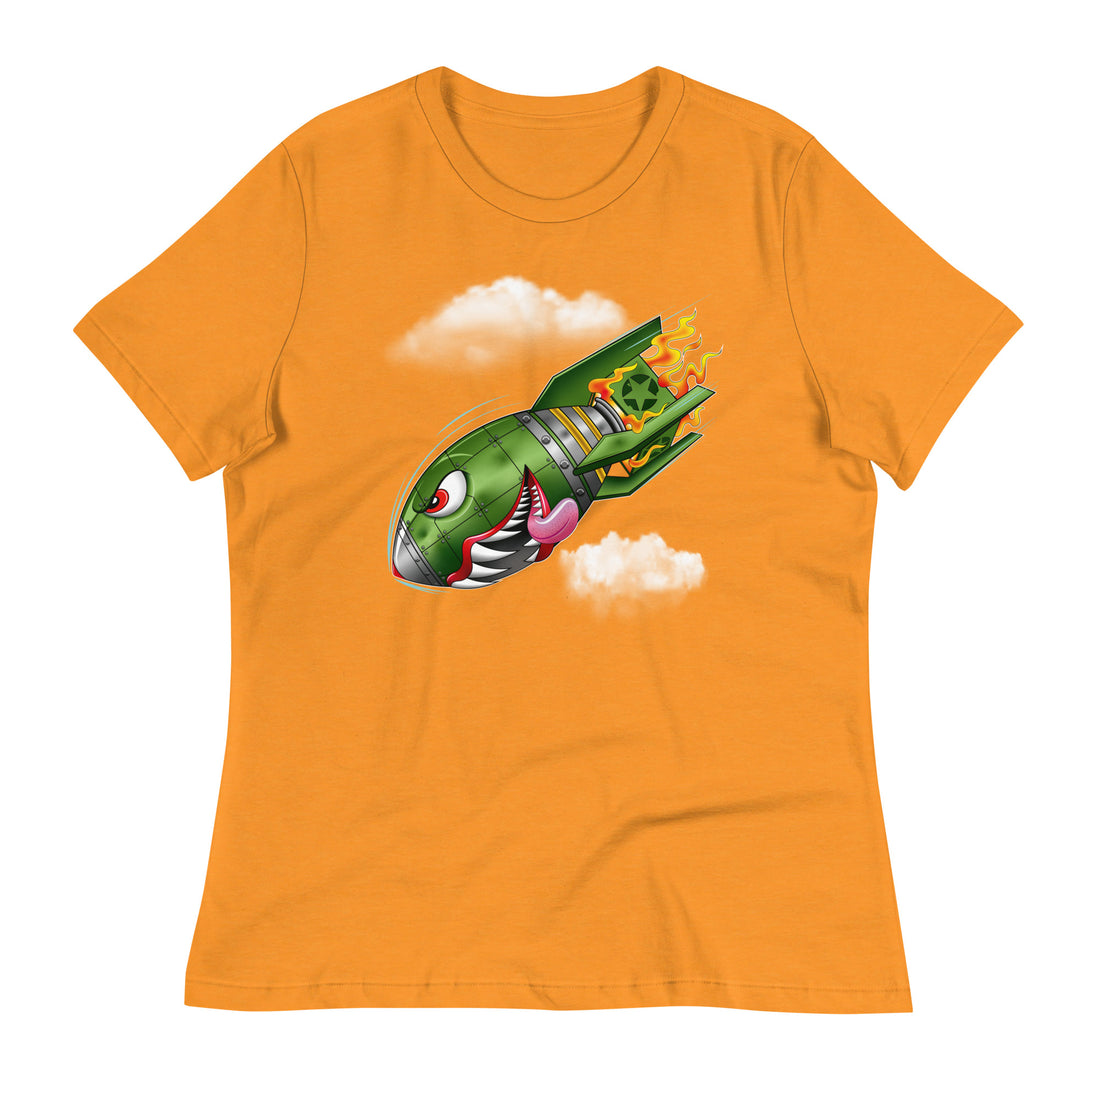 An orange t-shirt with a military green neo-traditional bomb tattoo design. The bomb is falling with a look of determination in its eyes, an evil toothy grin, and its tongue hanging out of its mouth. Flames are coming from the back of the bomb, and some clouds are in the background.